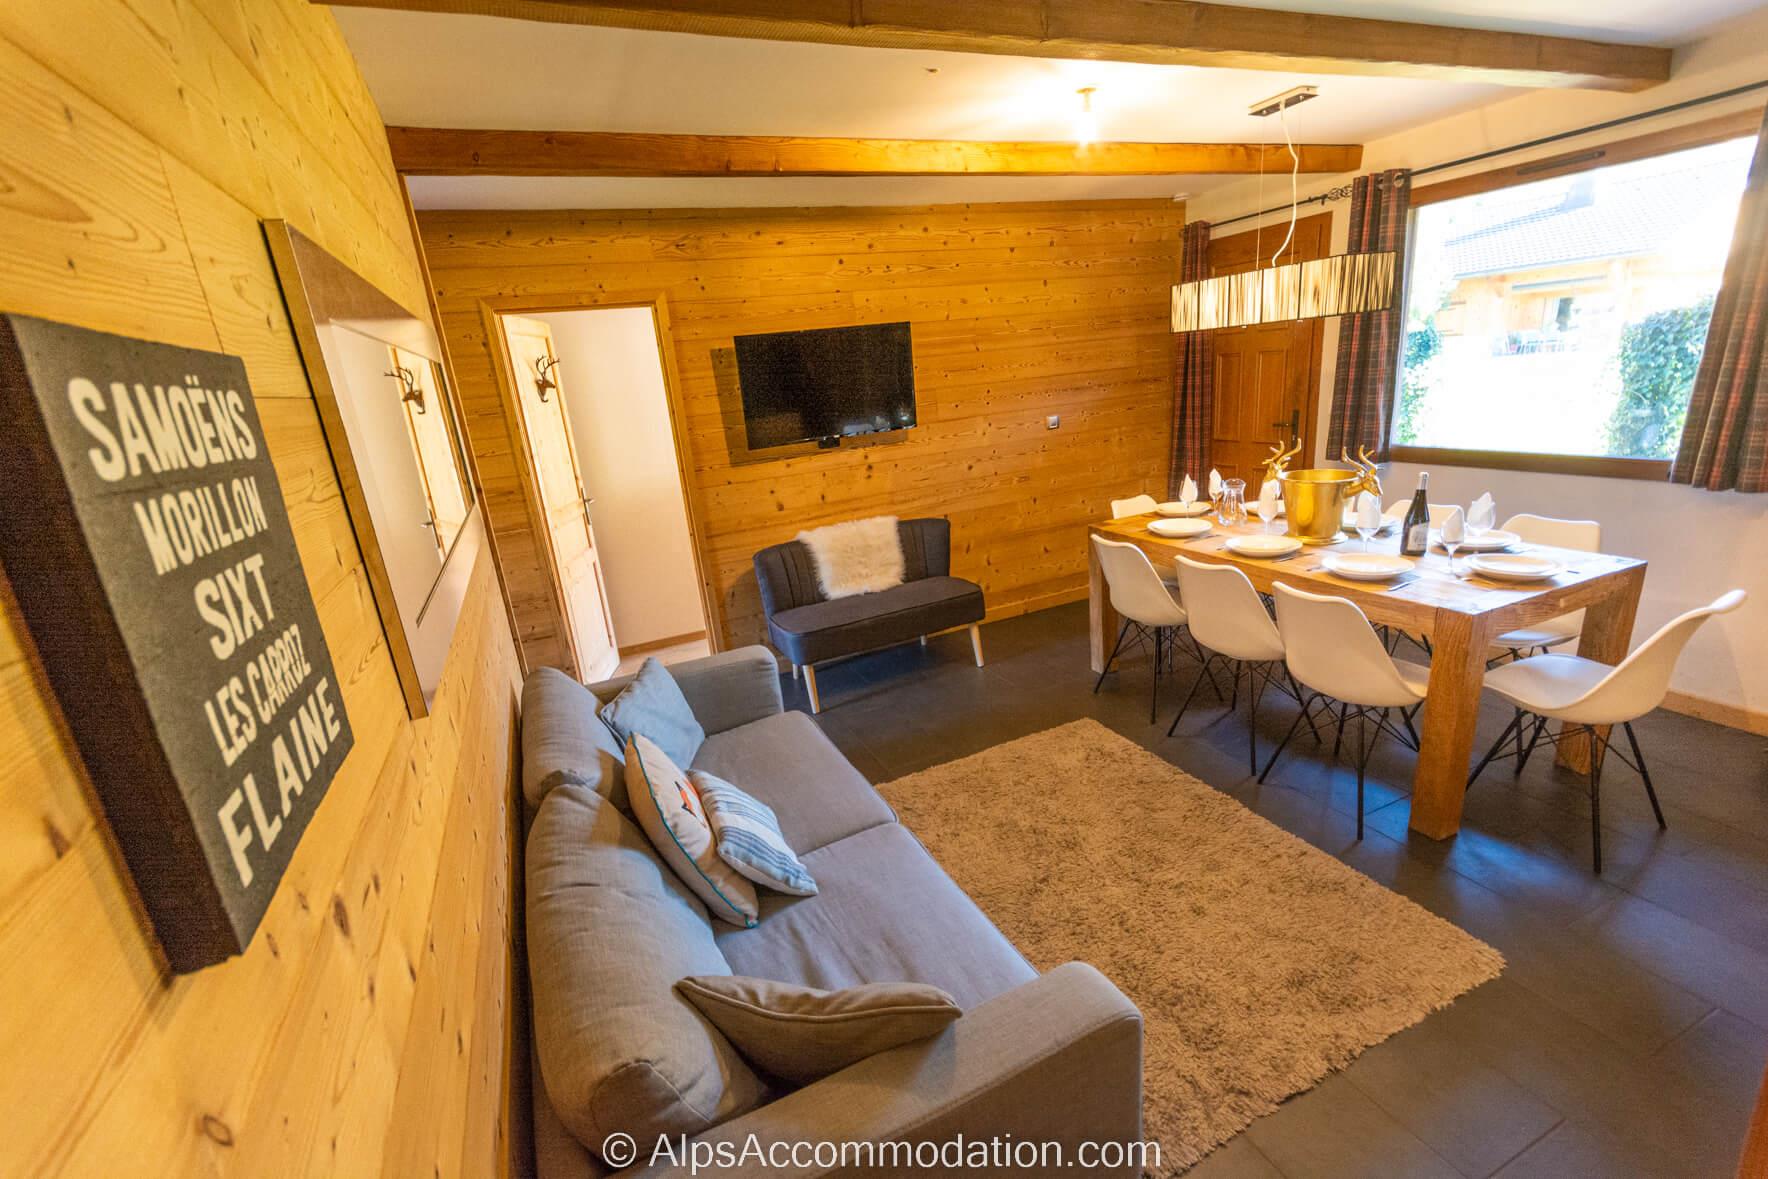 Chalet Balthazar Samoëns - Dining area and living area with views over the garden and a cosy log burner